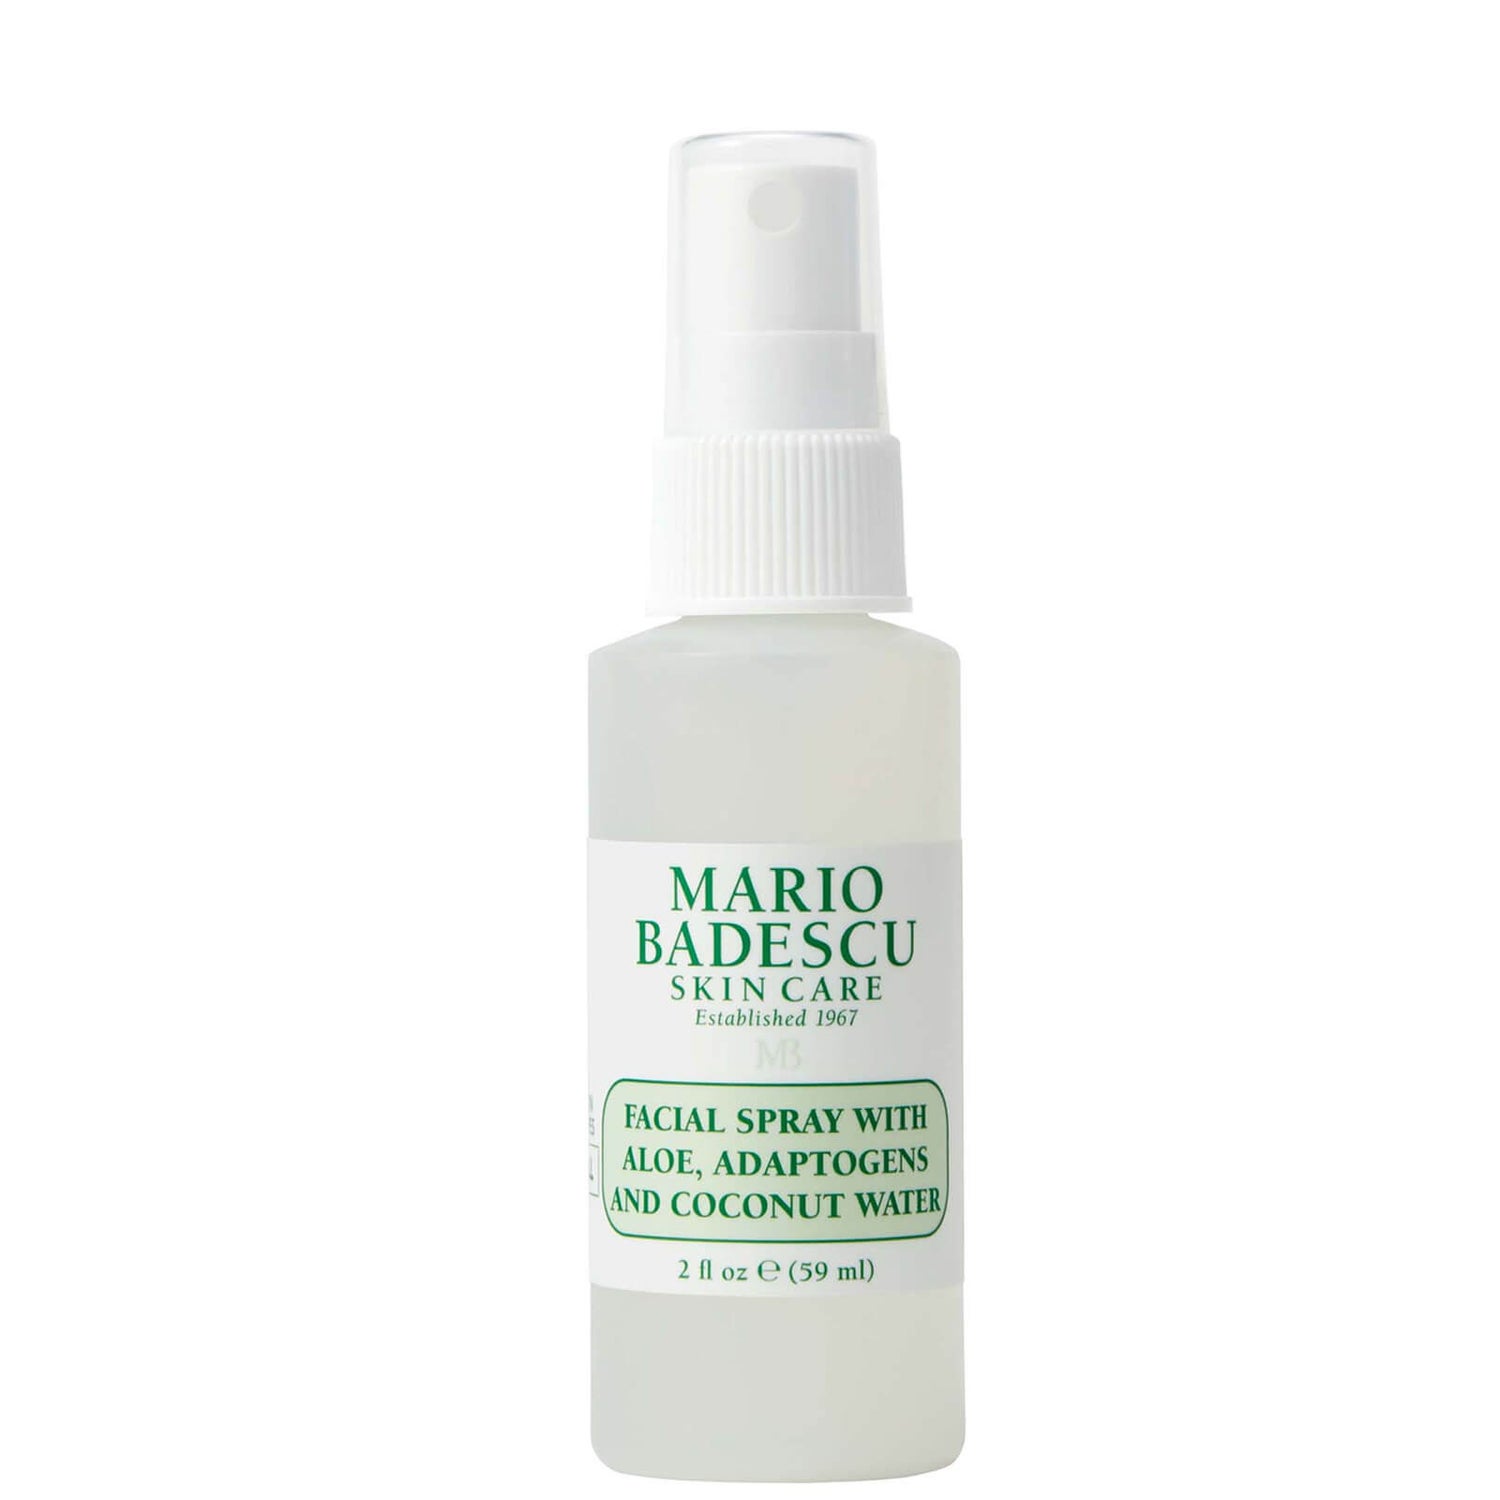 Mario Badescu Facial Spray With Aloe, Adaptogens And Coconut Water (Various Sizes)